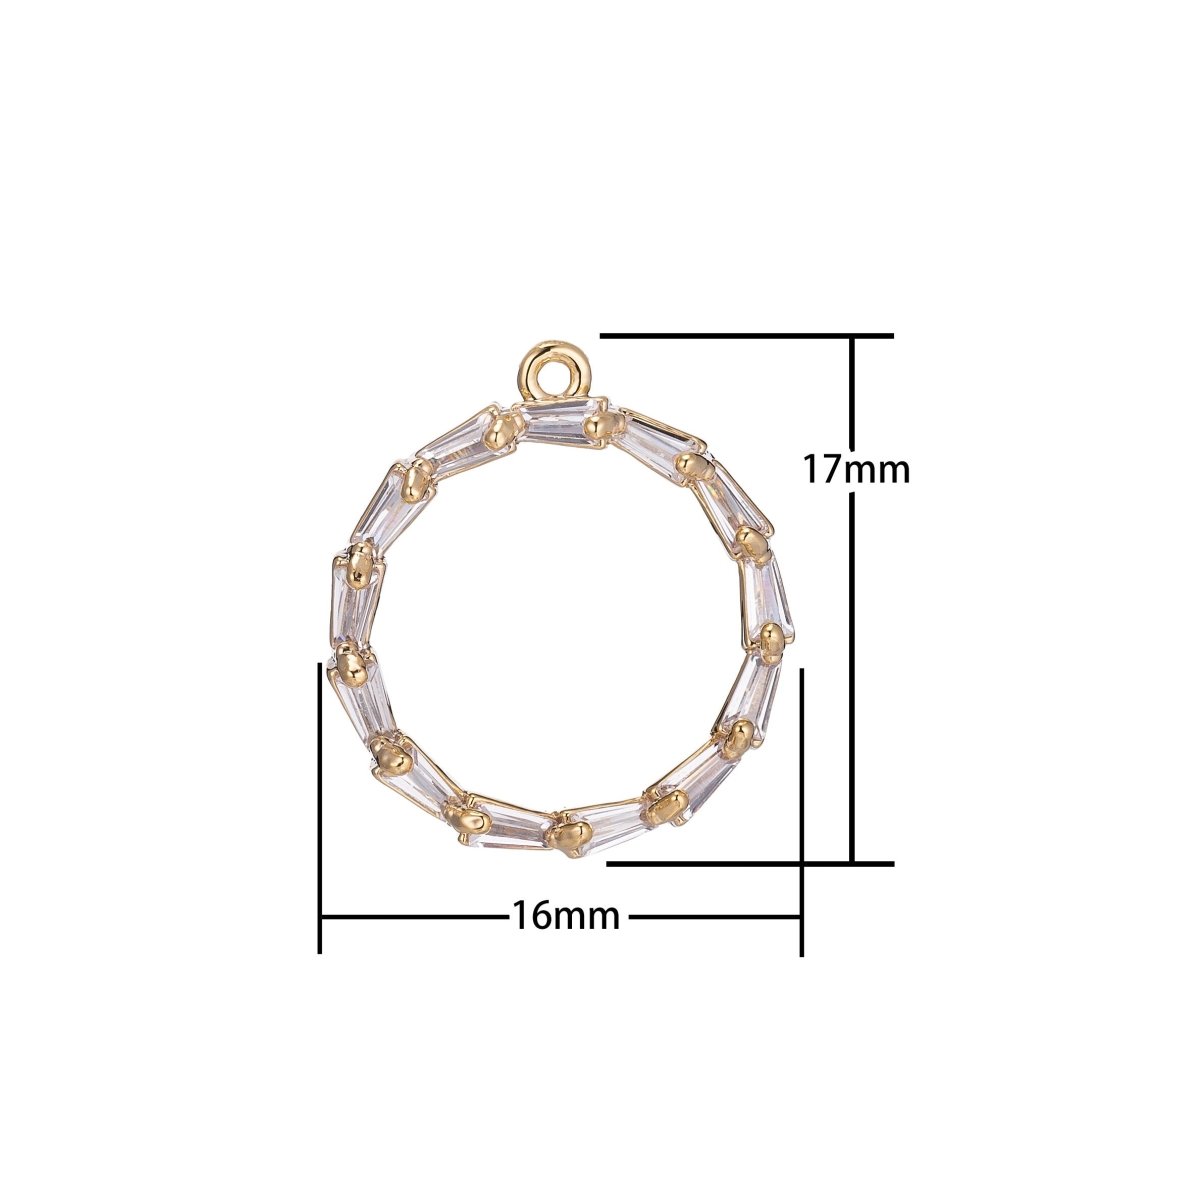 Dainty 18k Gold Filled Circle Charm Tiny Charm in Baguette Round Shape Coin Charm for Bracelet Necklace Earring Making, CL-E429 - DLUXCA